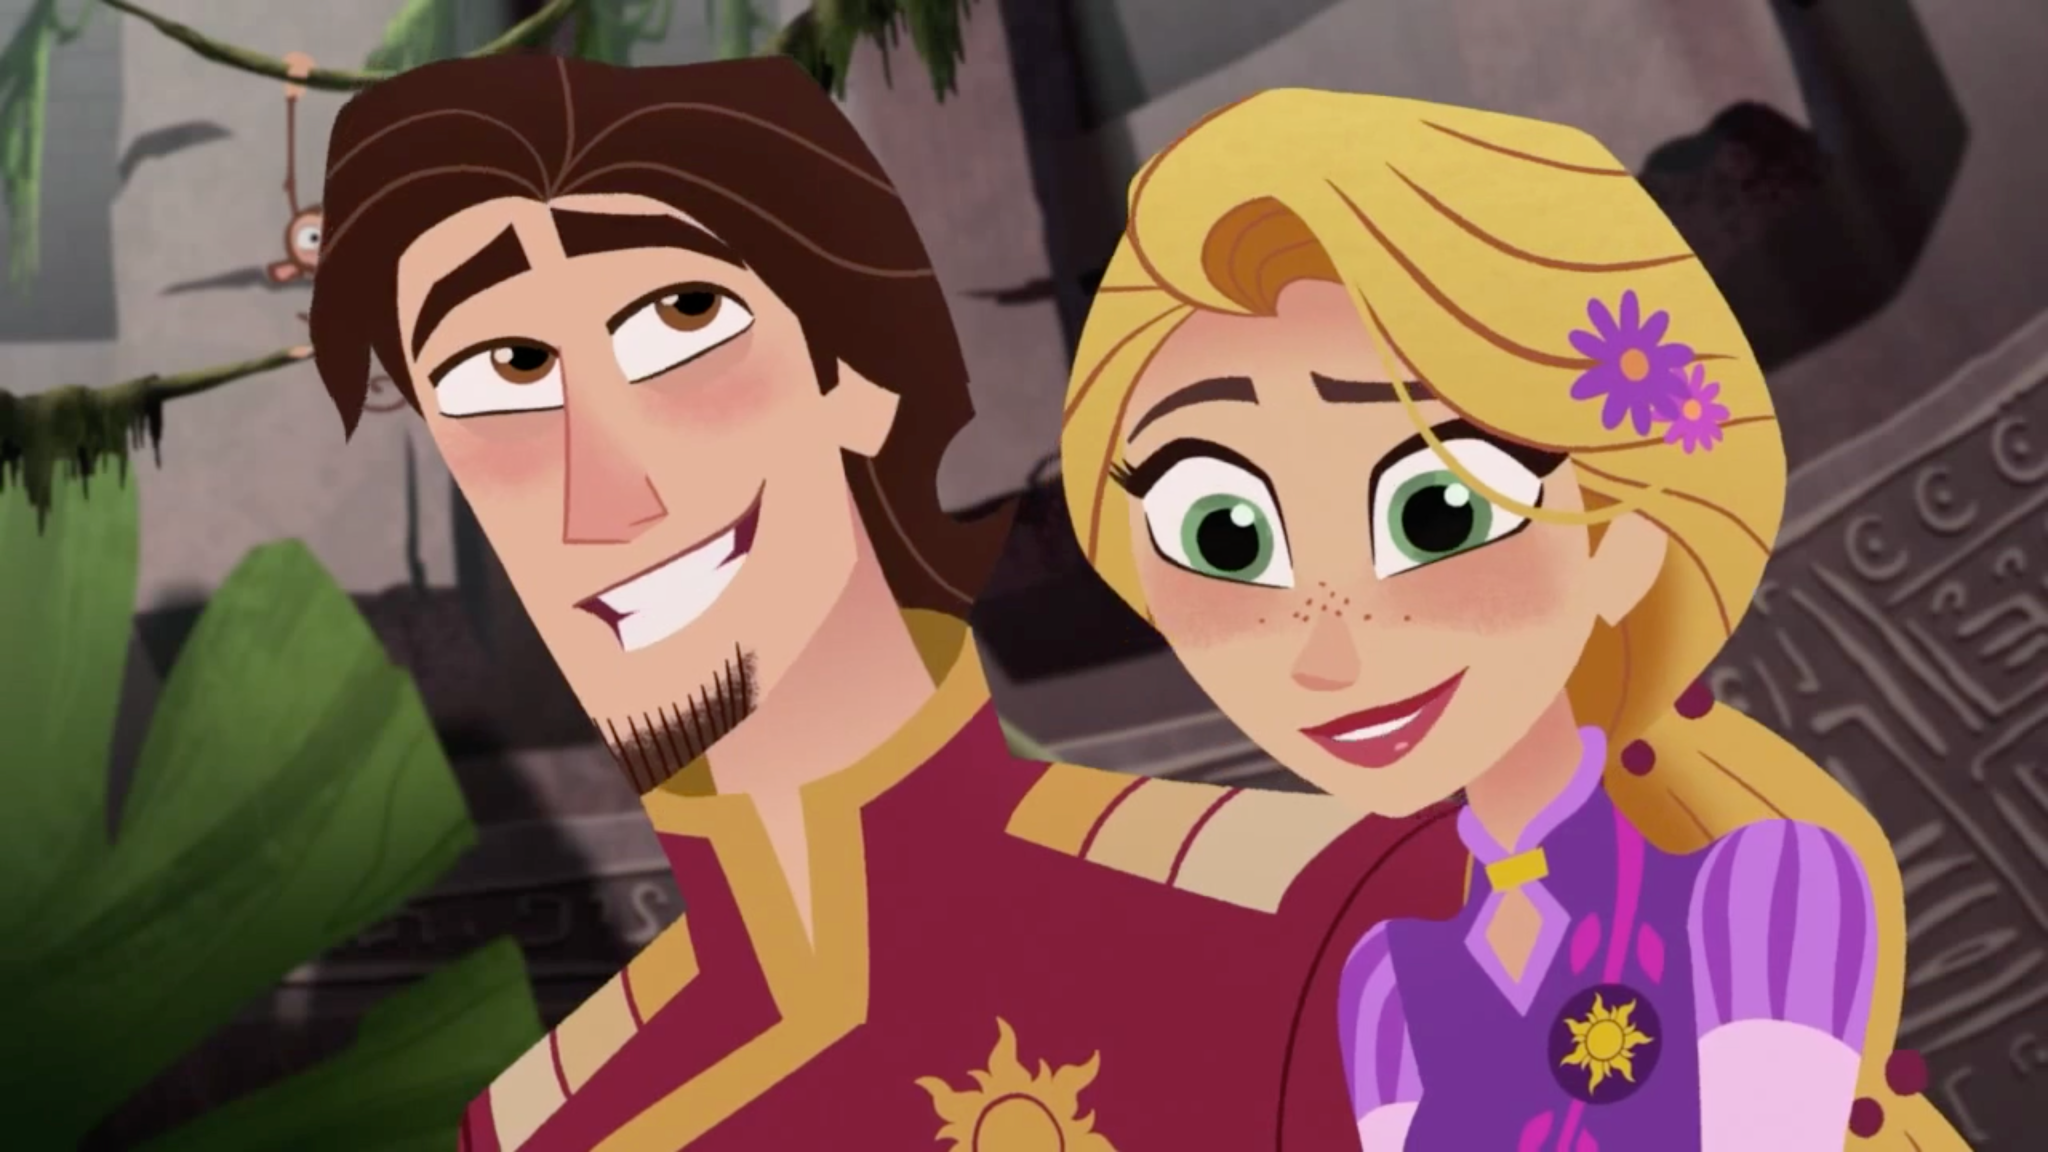 Tangled: The Series Picture